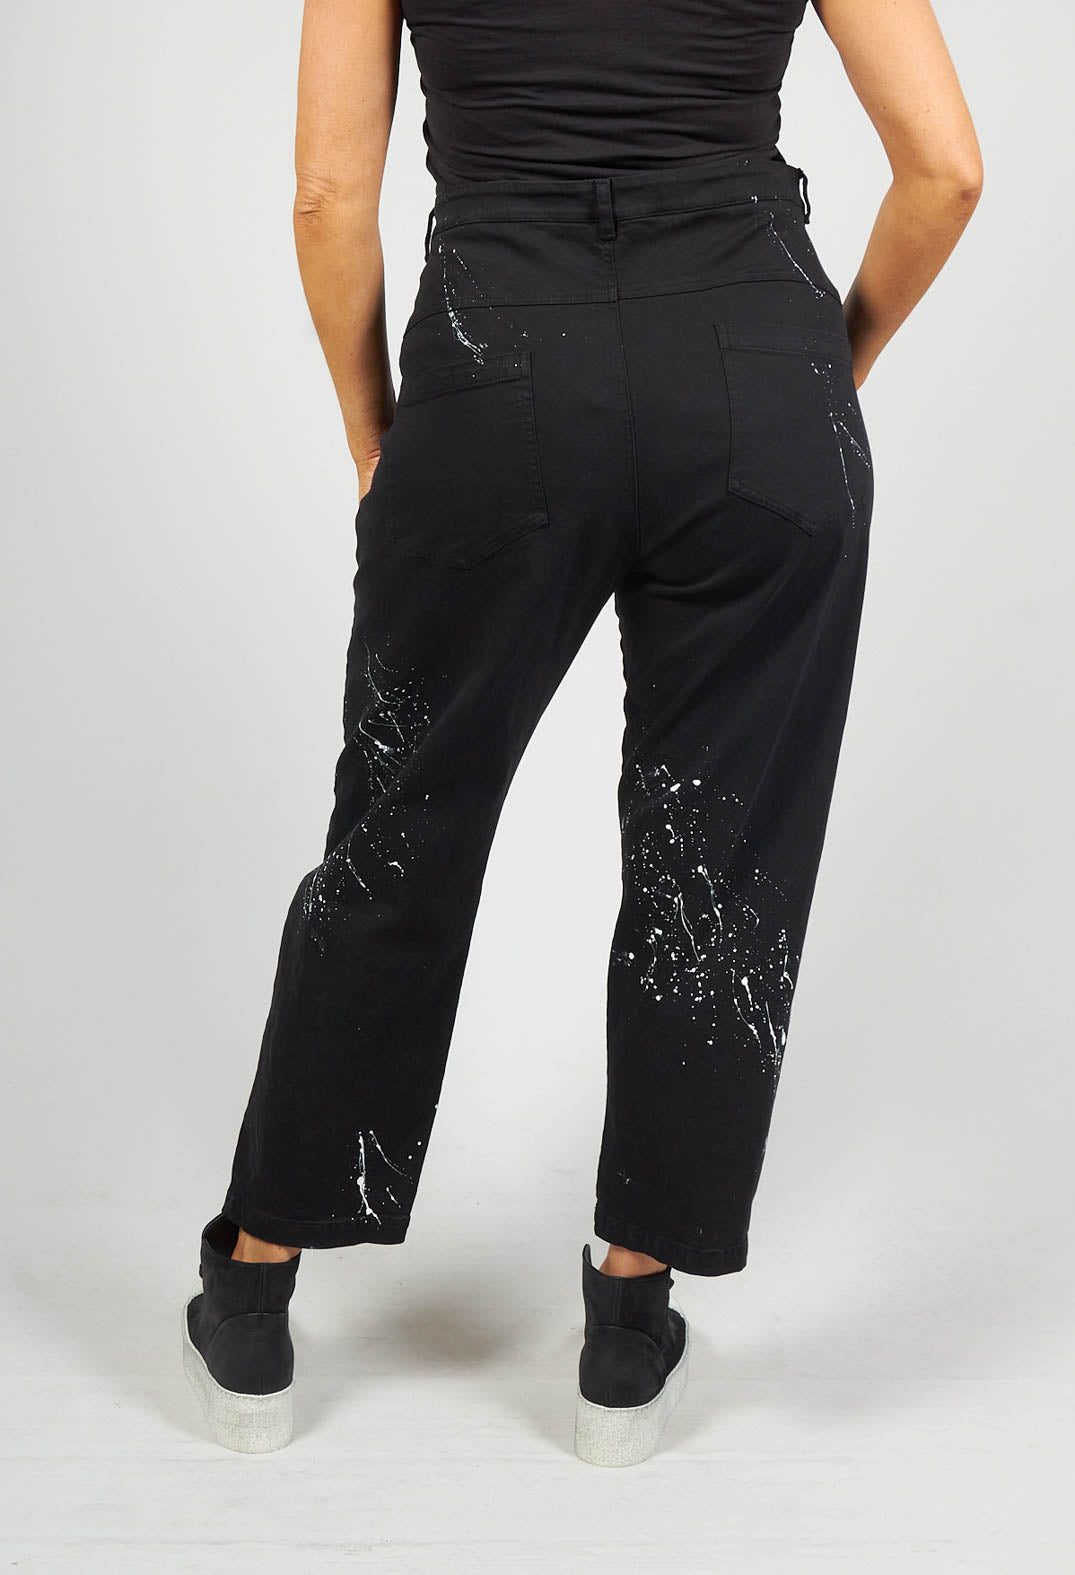 Denim Jeans with Contrasting Paint Detail in Black